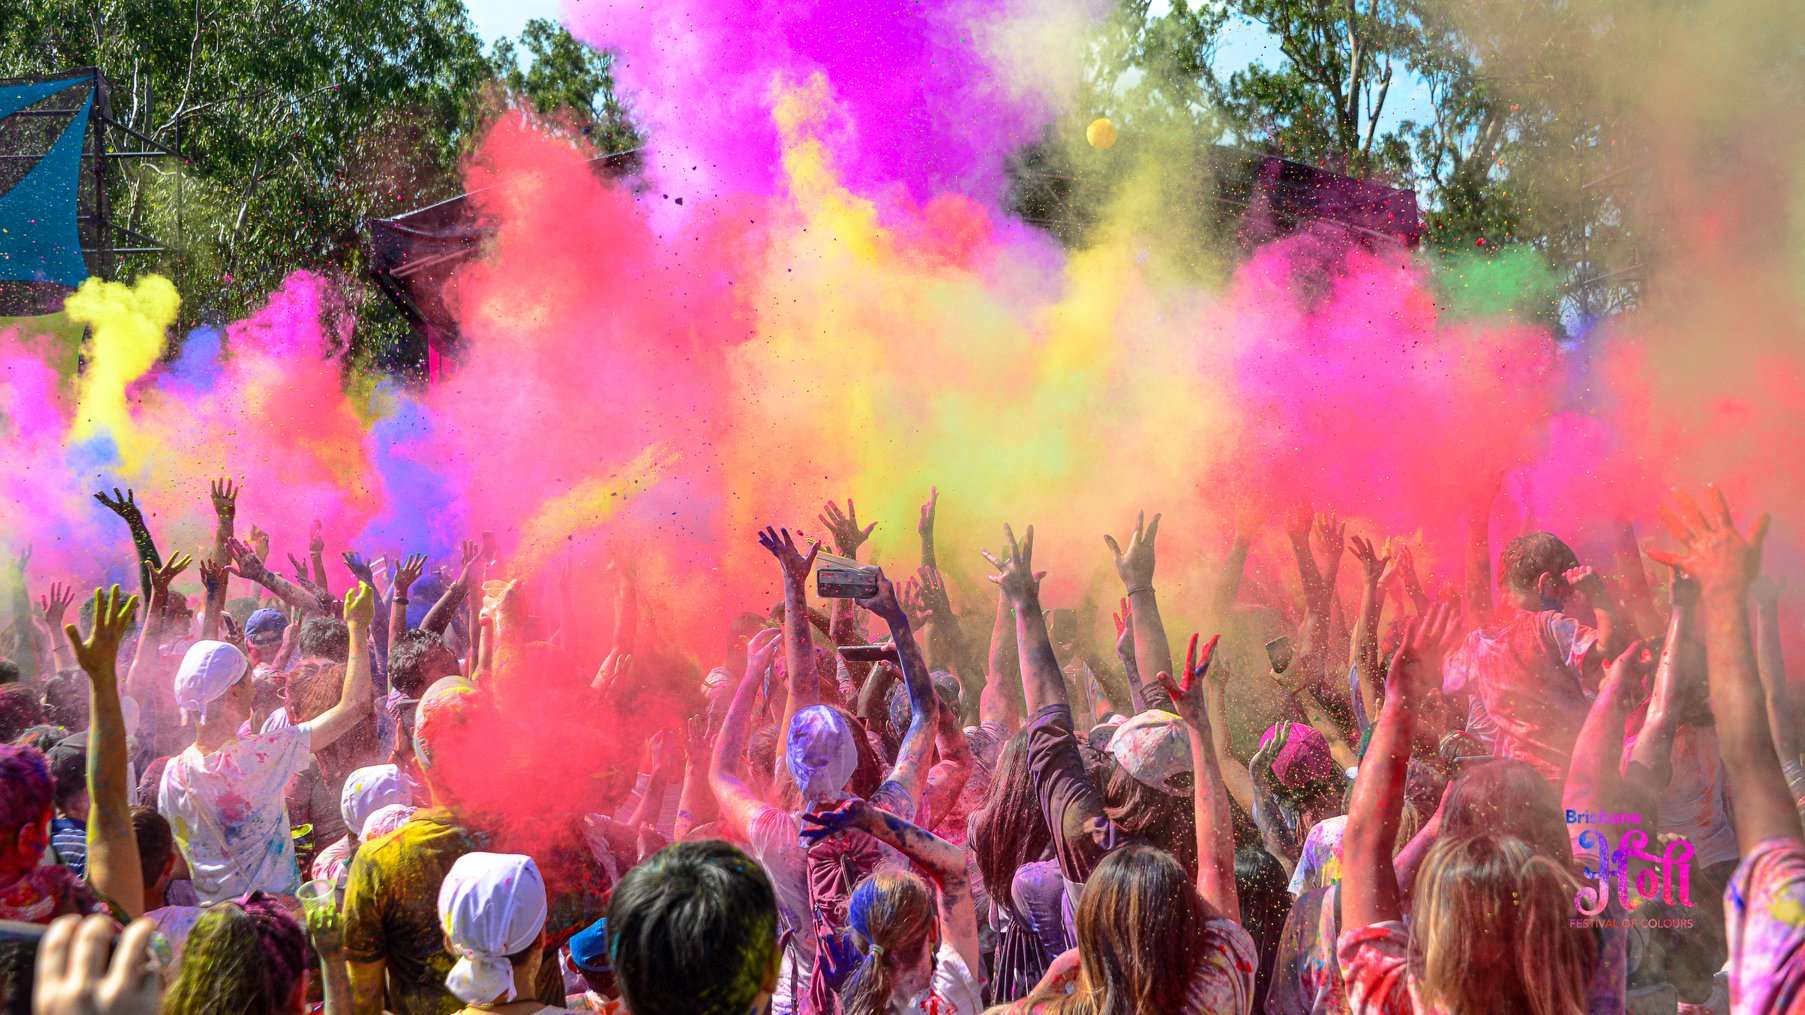 Today marks the start of Holi, a Hindu celebration known as the festival of colours.Revellers throw brightly coloured powder and water balloons at each other on the streets as part of the festivities, as well as singing, dancing and gathering around bonfires.In India the festival is held over two days. On the first, families pray and sing and dance around a bonfire which symbolises cleansing. On the second day, participants take to the streets to douse each other with coloured powder while firing water pistols and throwing water balloons.The coloured powders, known as gulal, were traditionally made from natural sources like turmeric and indigo and believed to have healing properties.Now they are typically made from synthetic materials and are coloured bright yellow, pink, green, red, blue and various colours of the rainbow.